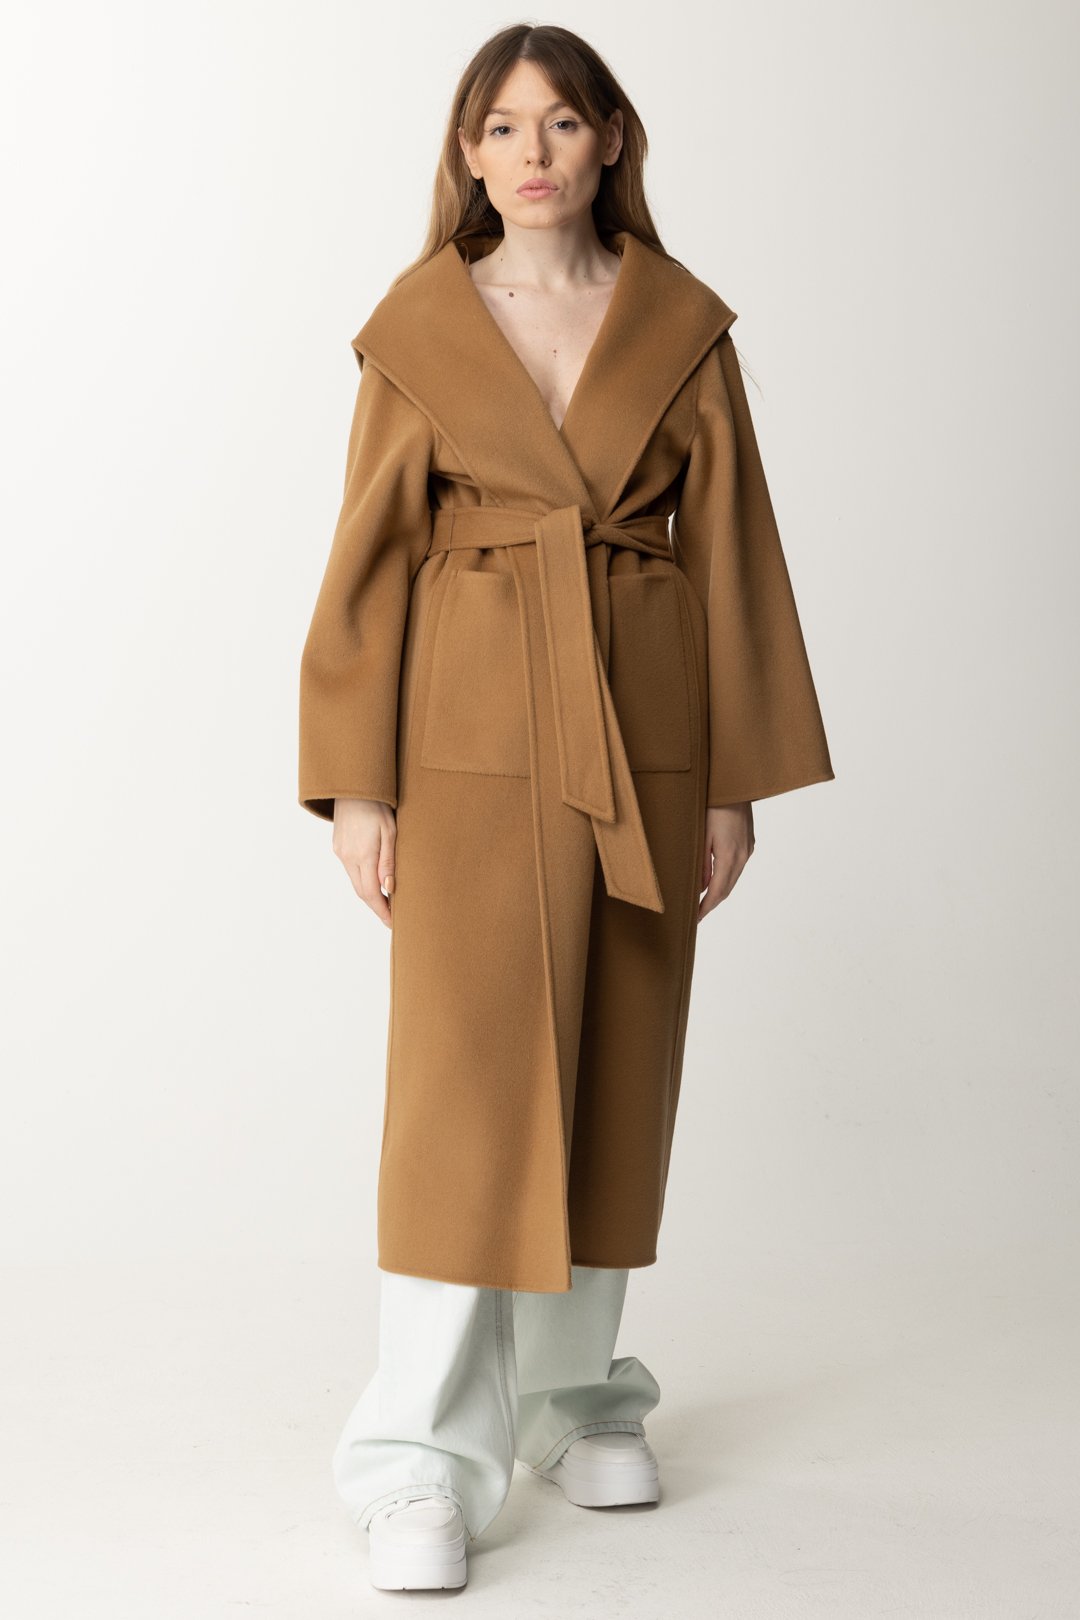 Preview: Pinko Long wool coat with hood CAMMELLO MOCACCINO